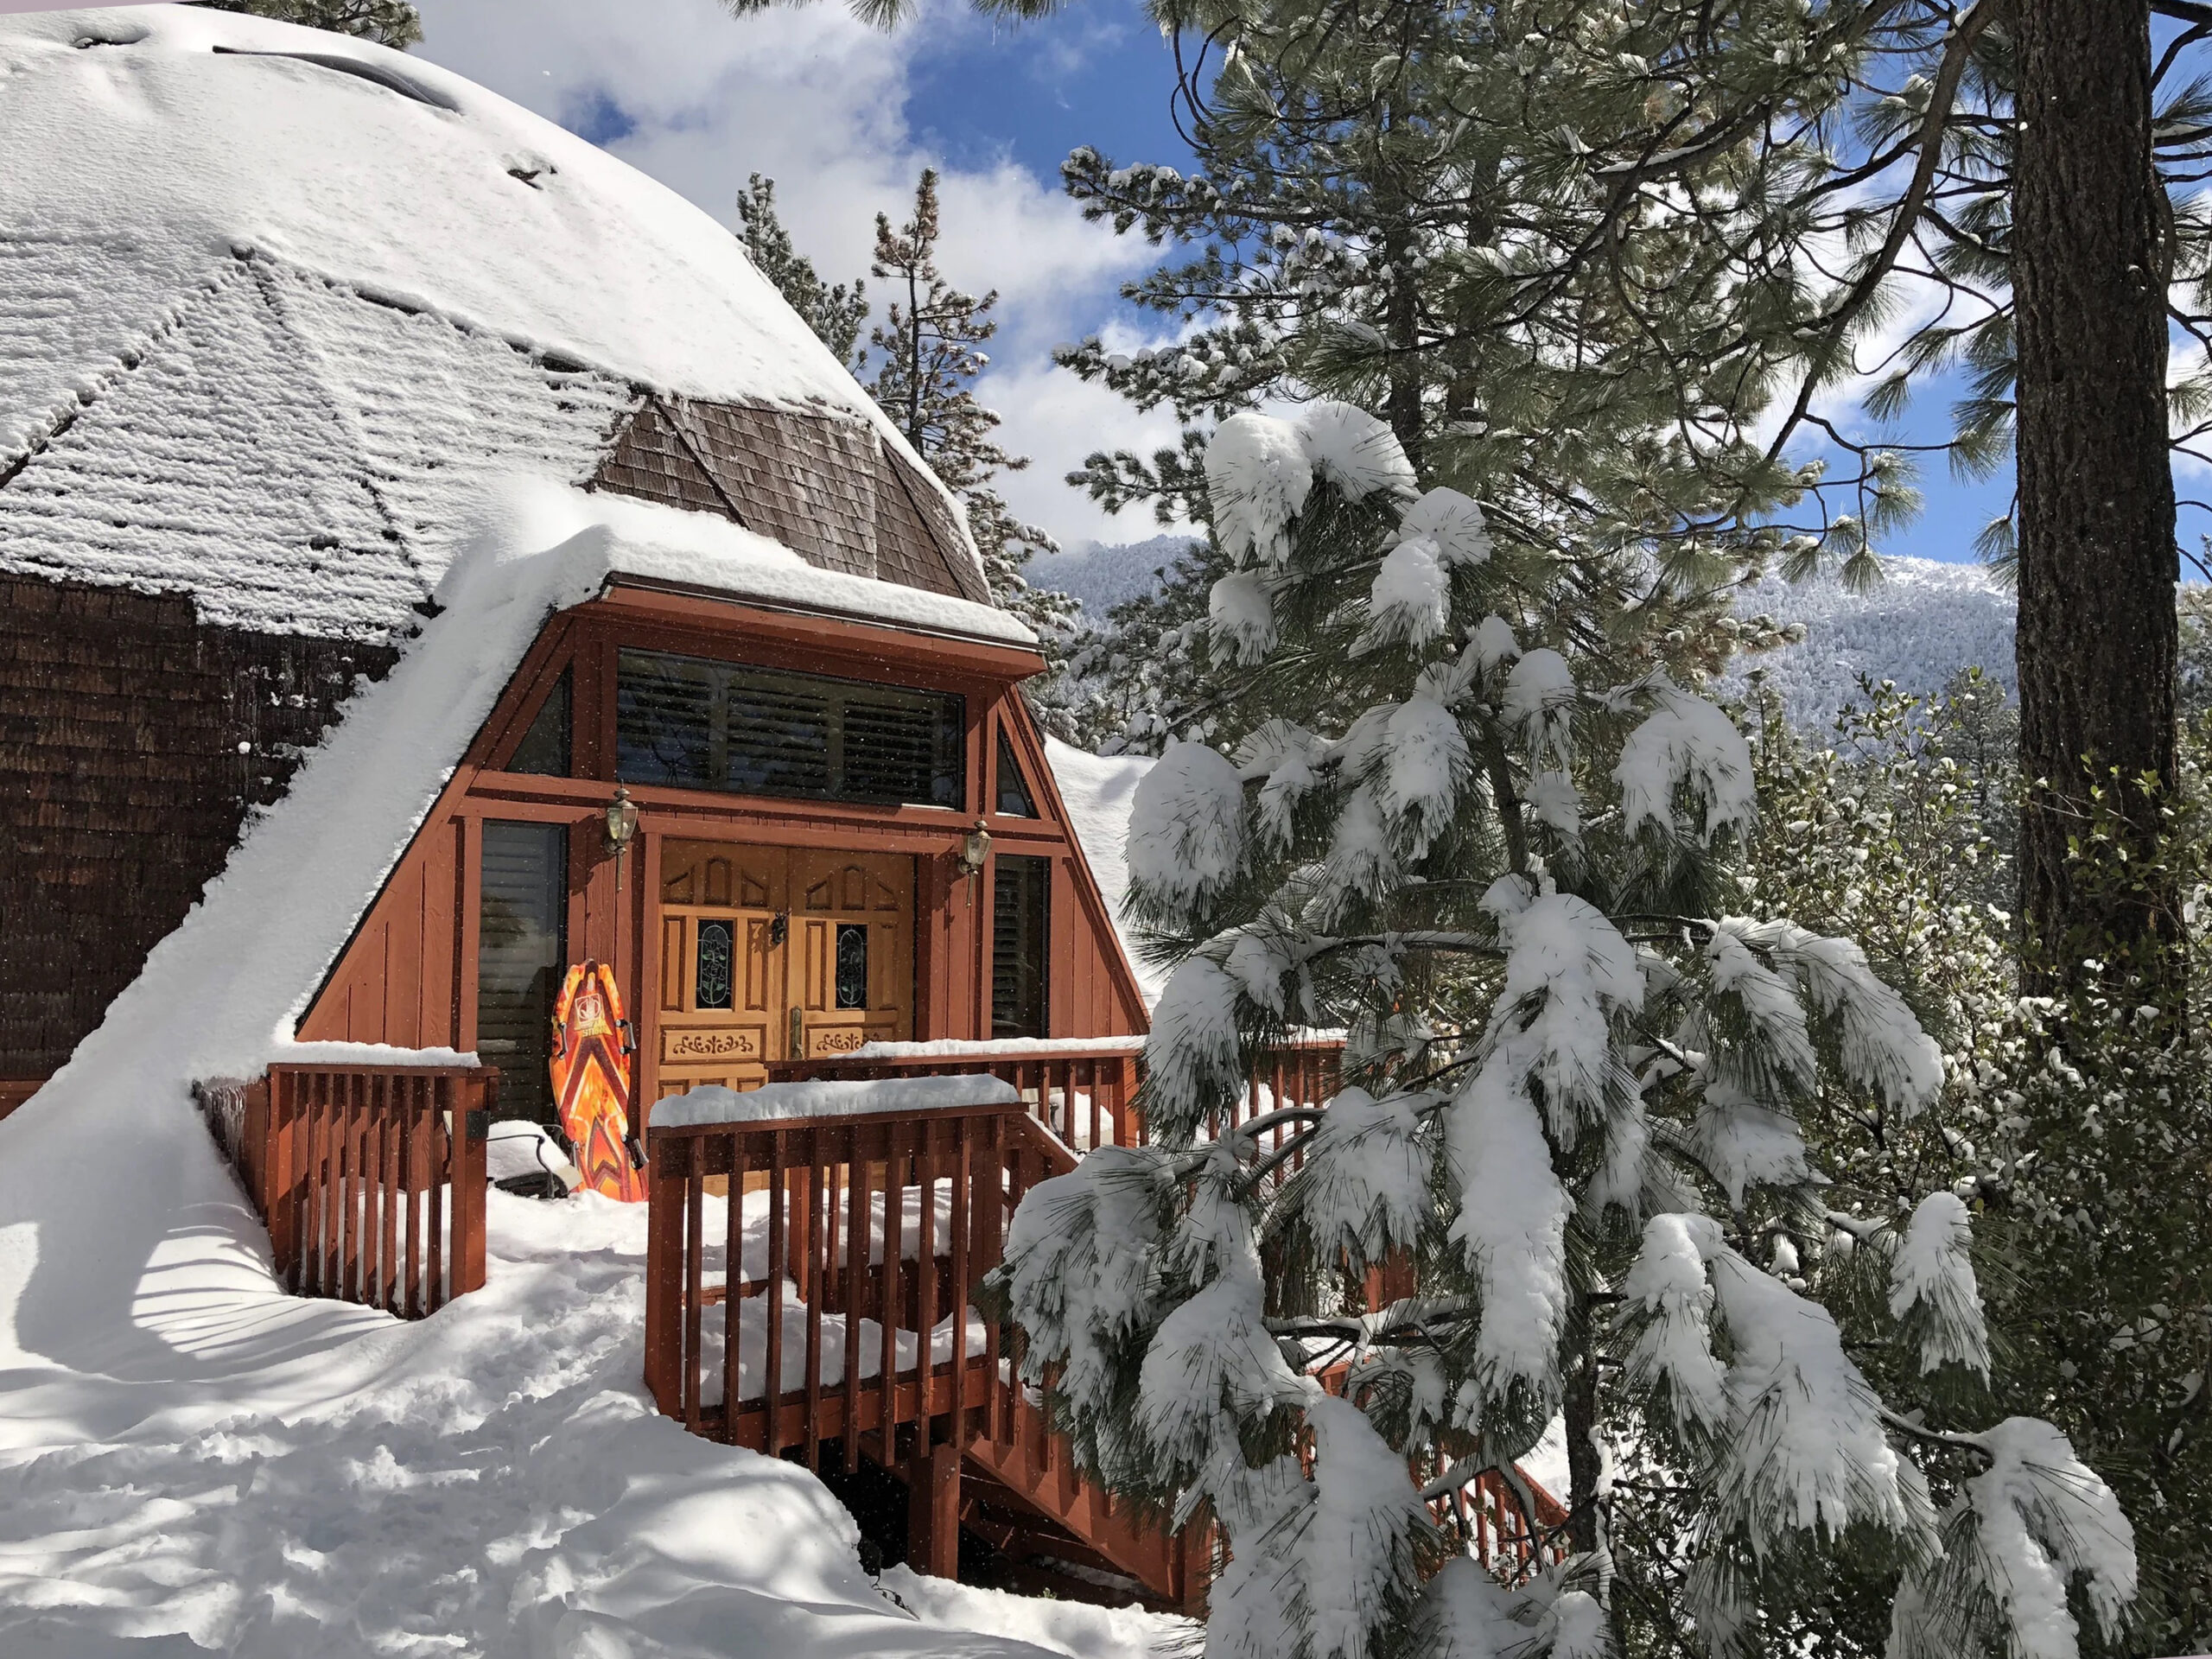 Snowy scene on a geodesic cabin rental called Under the Dome near Idyllwild, California.